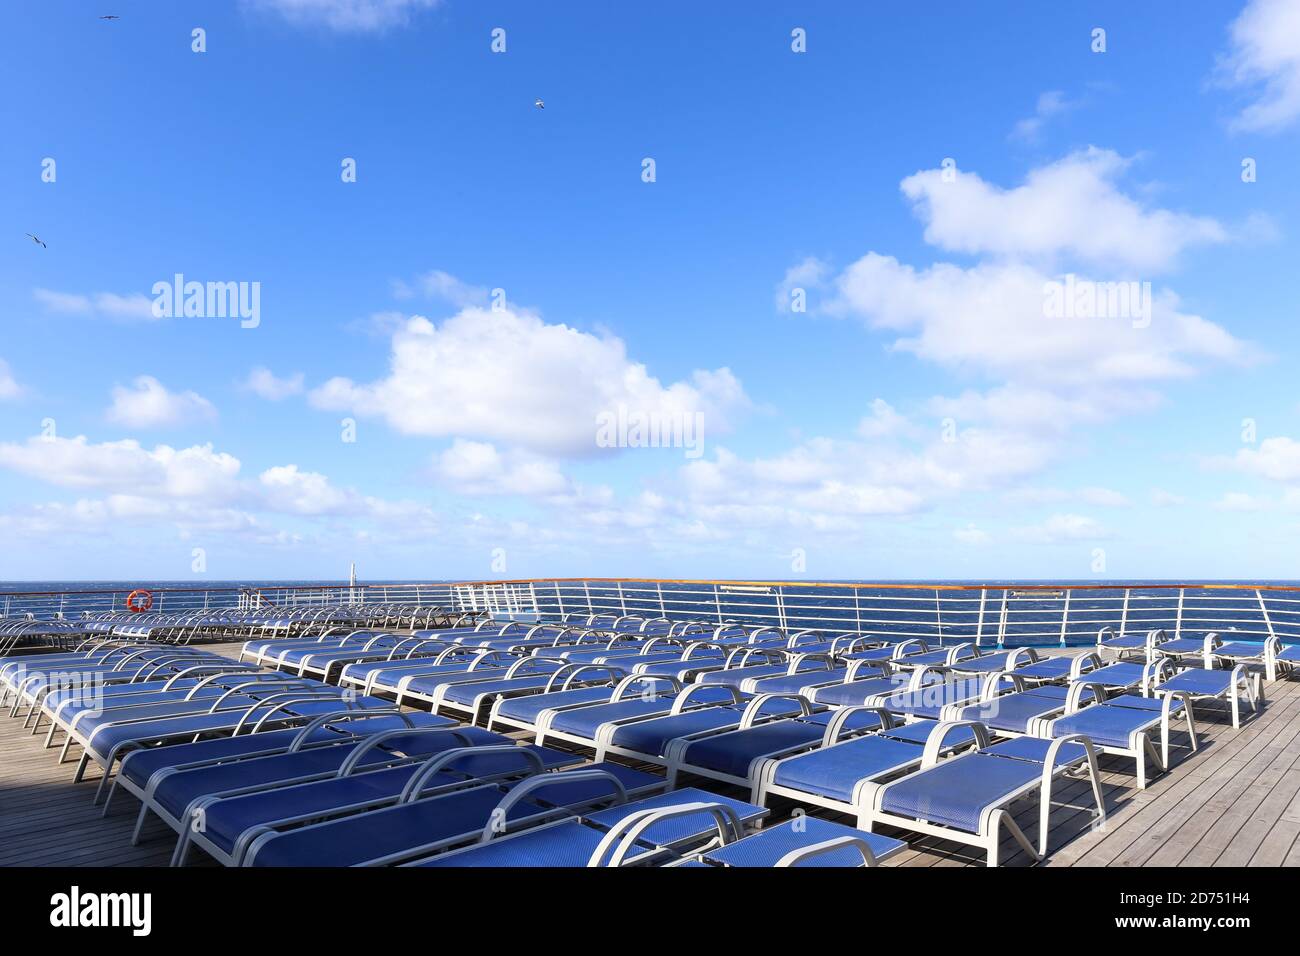 sun bathing beds on a deck of cruise ship in the pacific ocean on a sunny day Stock Photo